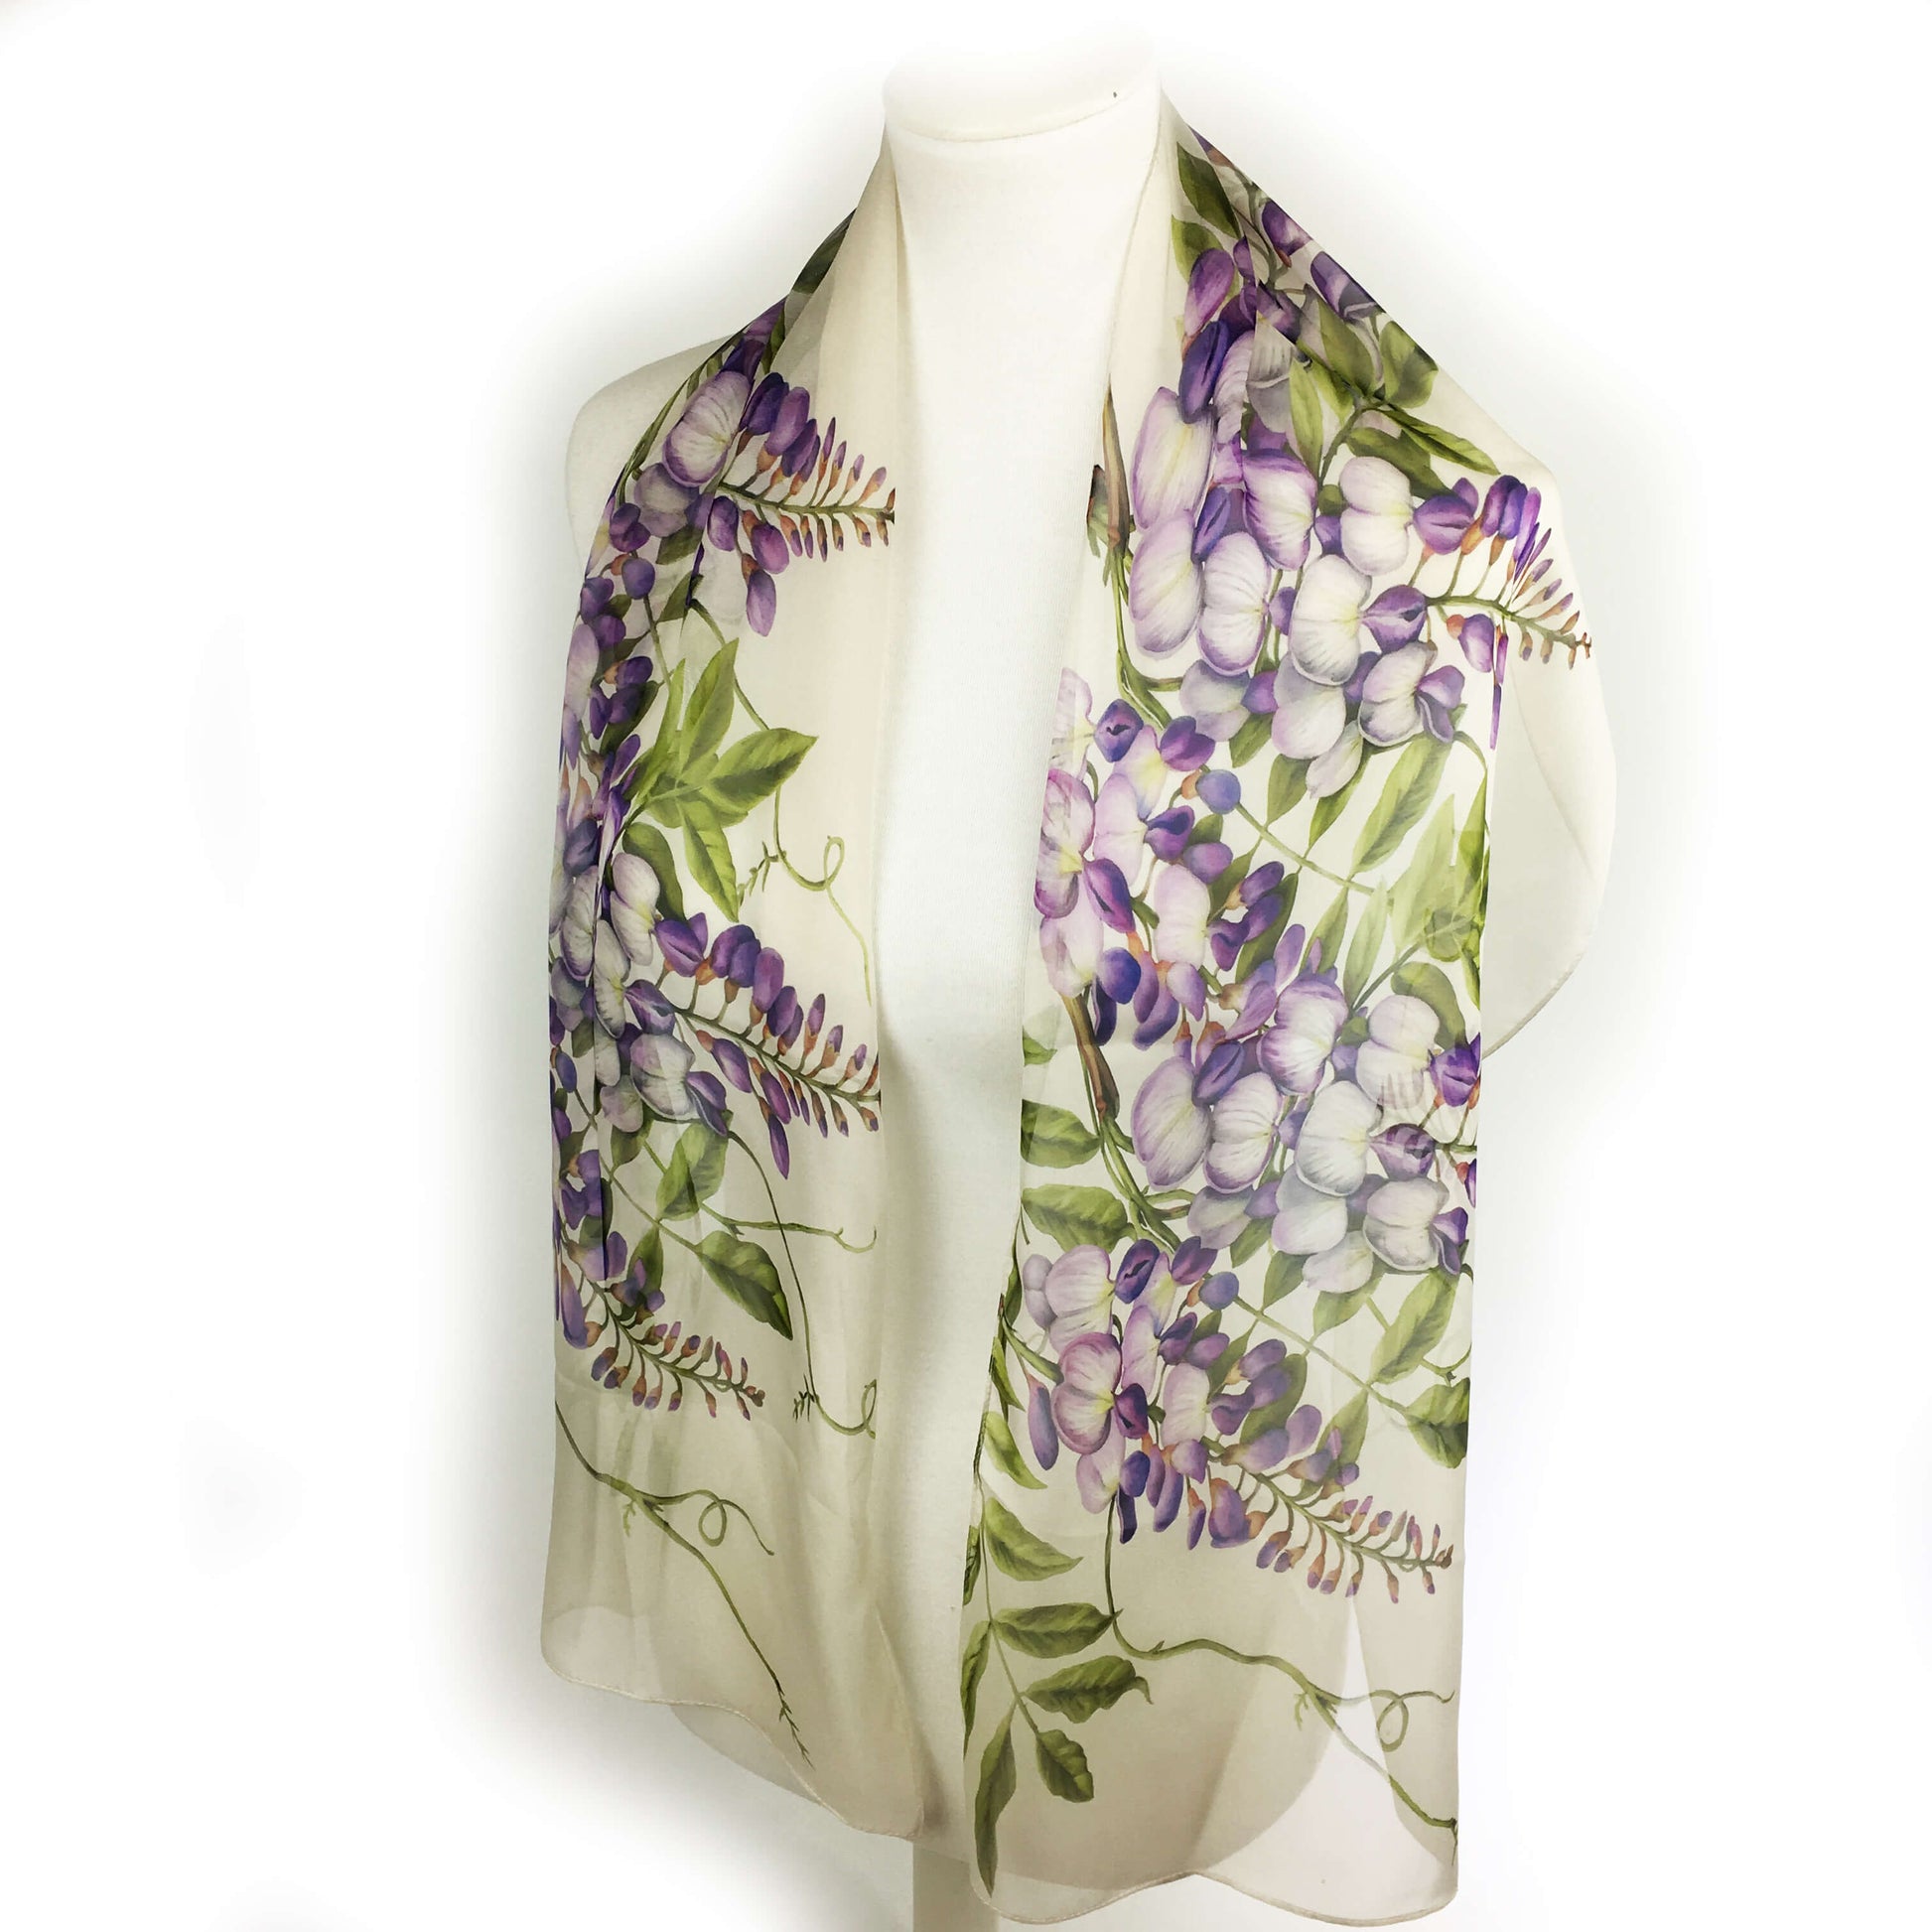 Wisteria floral chiffon scarf on soft white - UndertheLeafDesigns.com